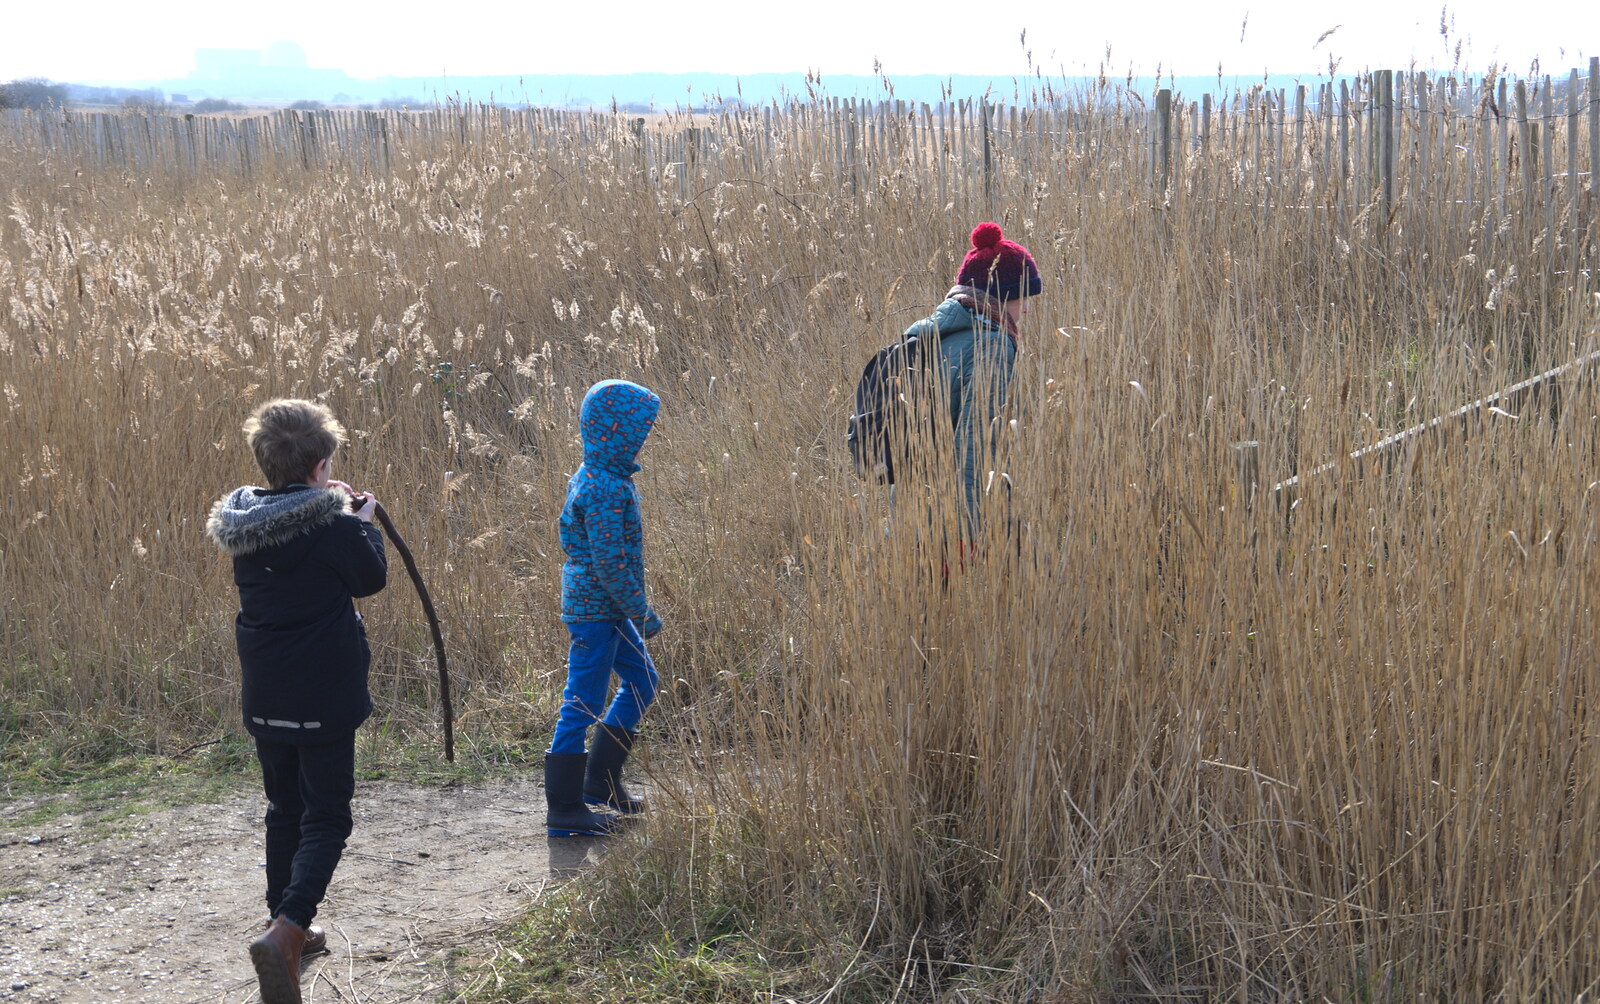 The gang disappear into the reeds from A Trip to Dunwich Heath, Dunwich, Suffolk - 17th February 2019